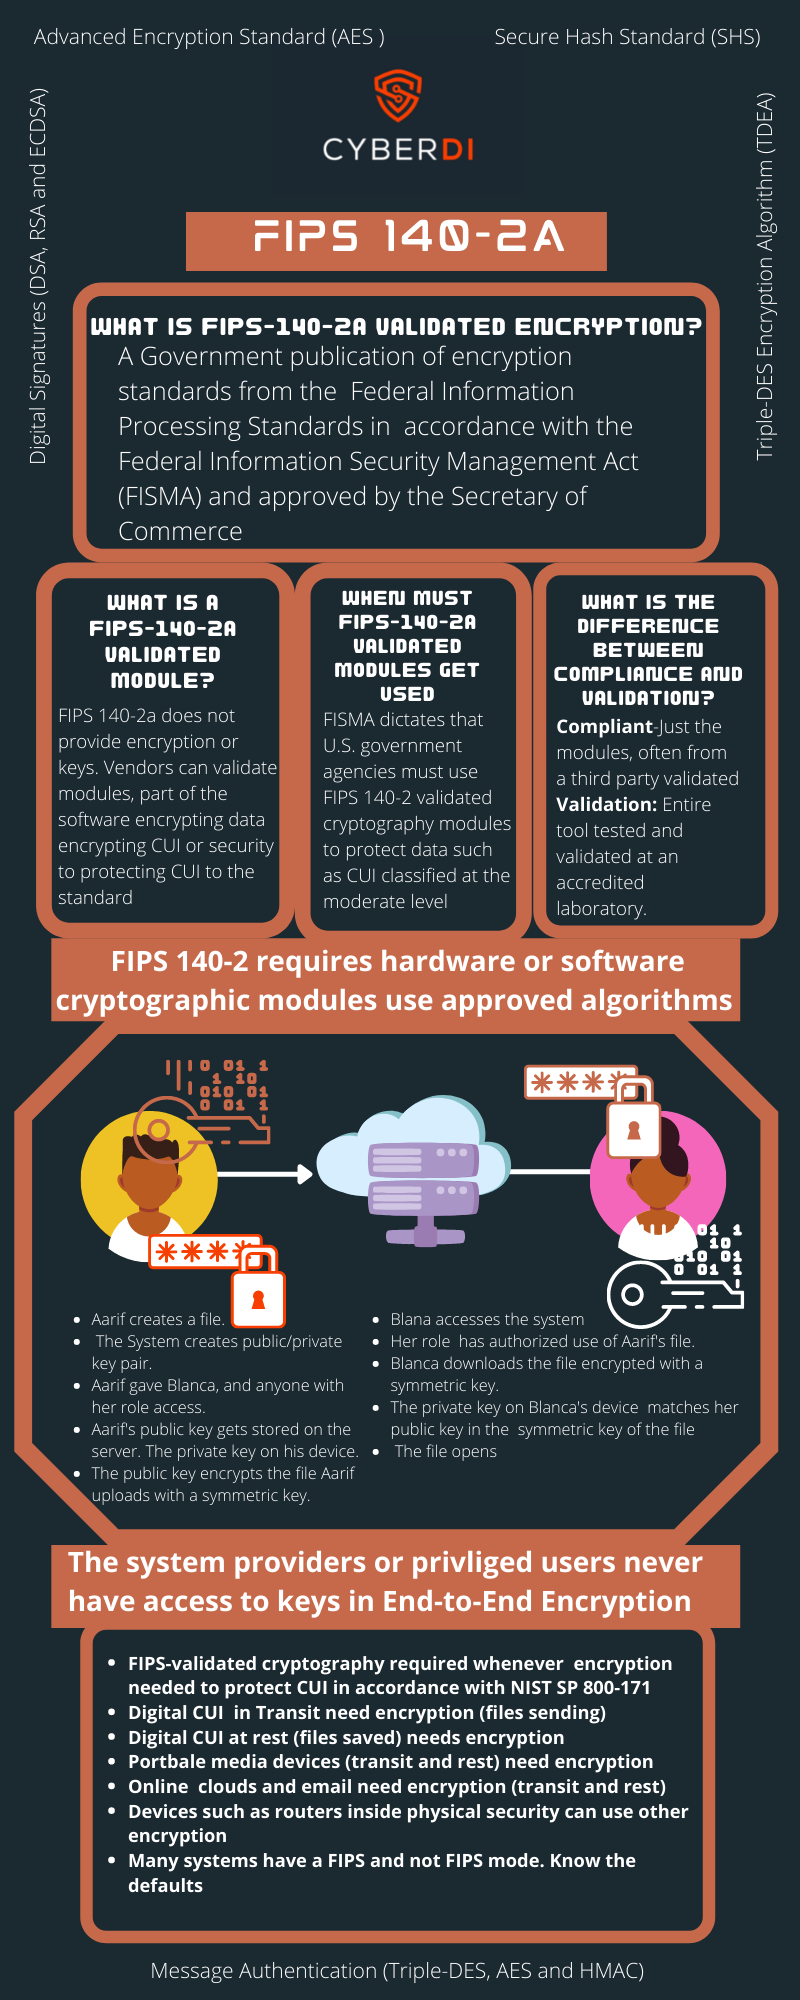 FIPS 140-2a learn the basecs of FIPS encryption